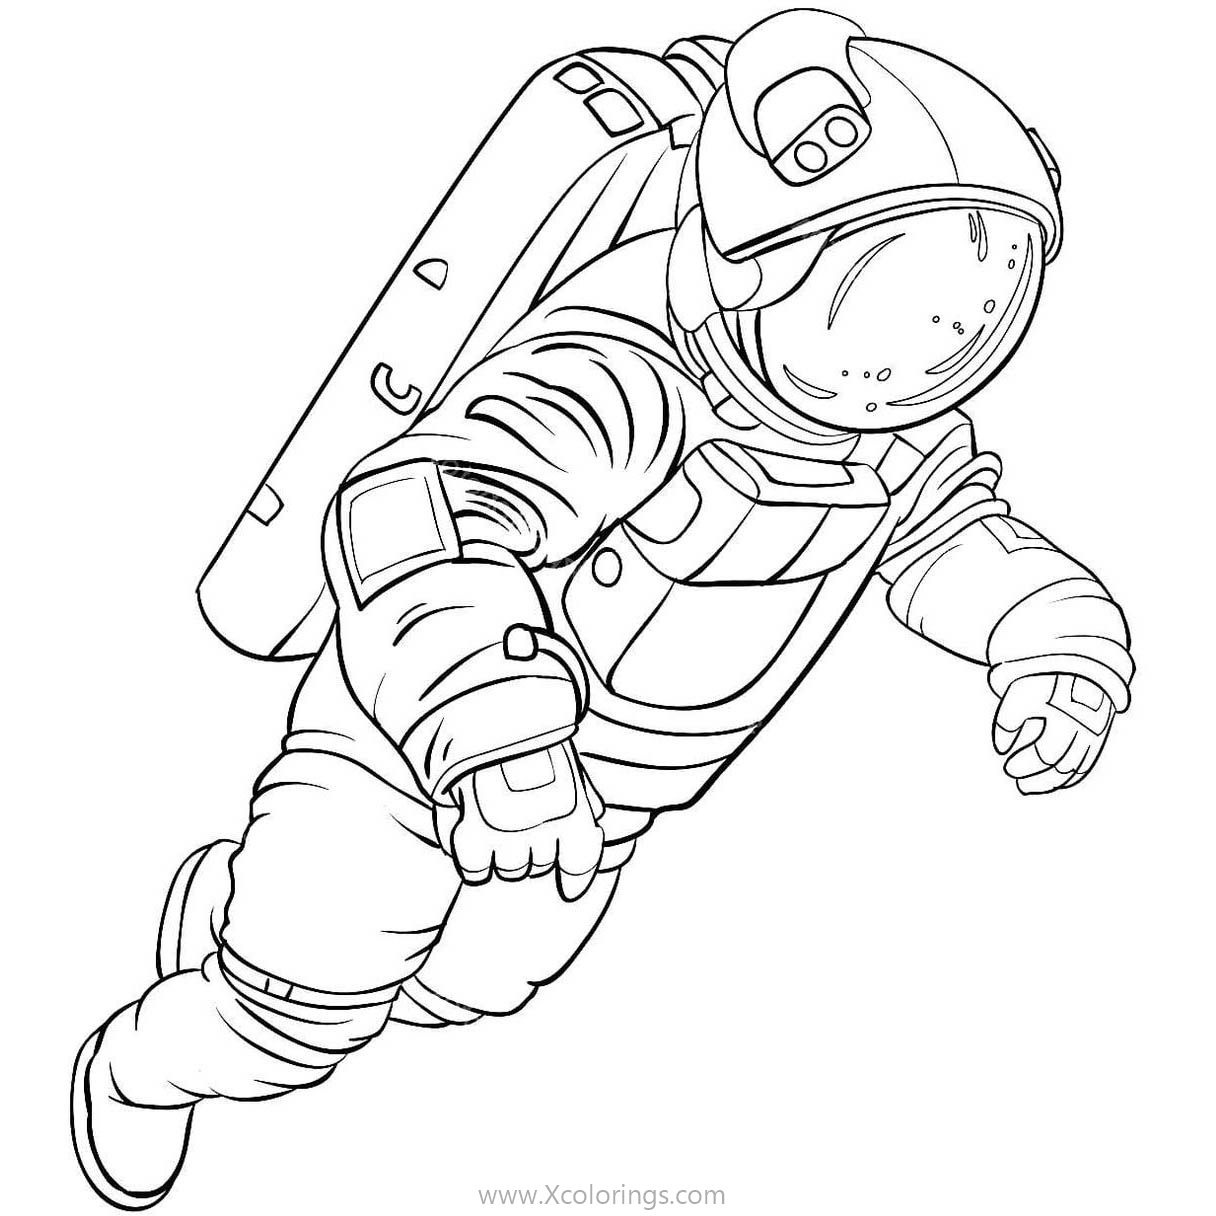 Astronaut with Spacesuit Coloring Pages - XColorings.com